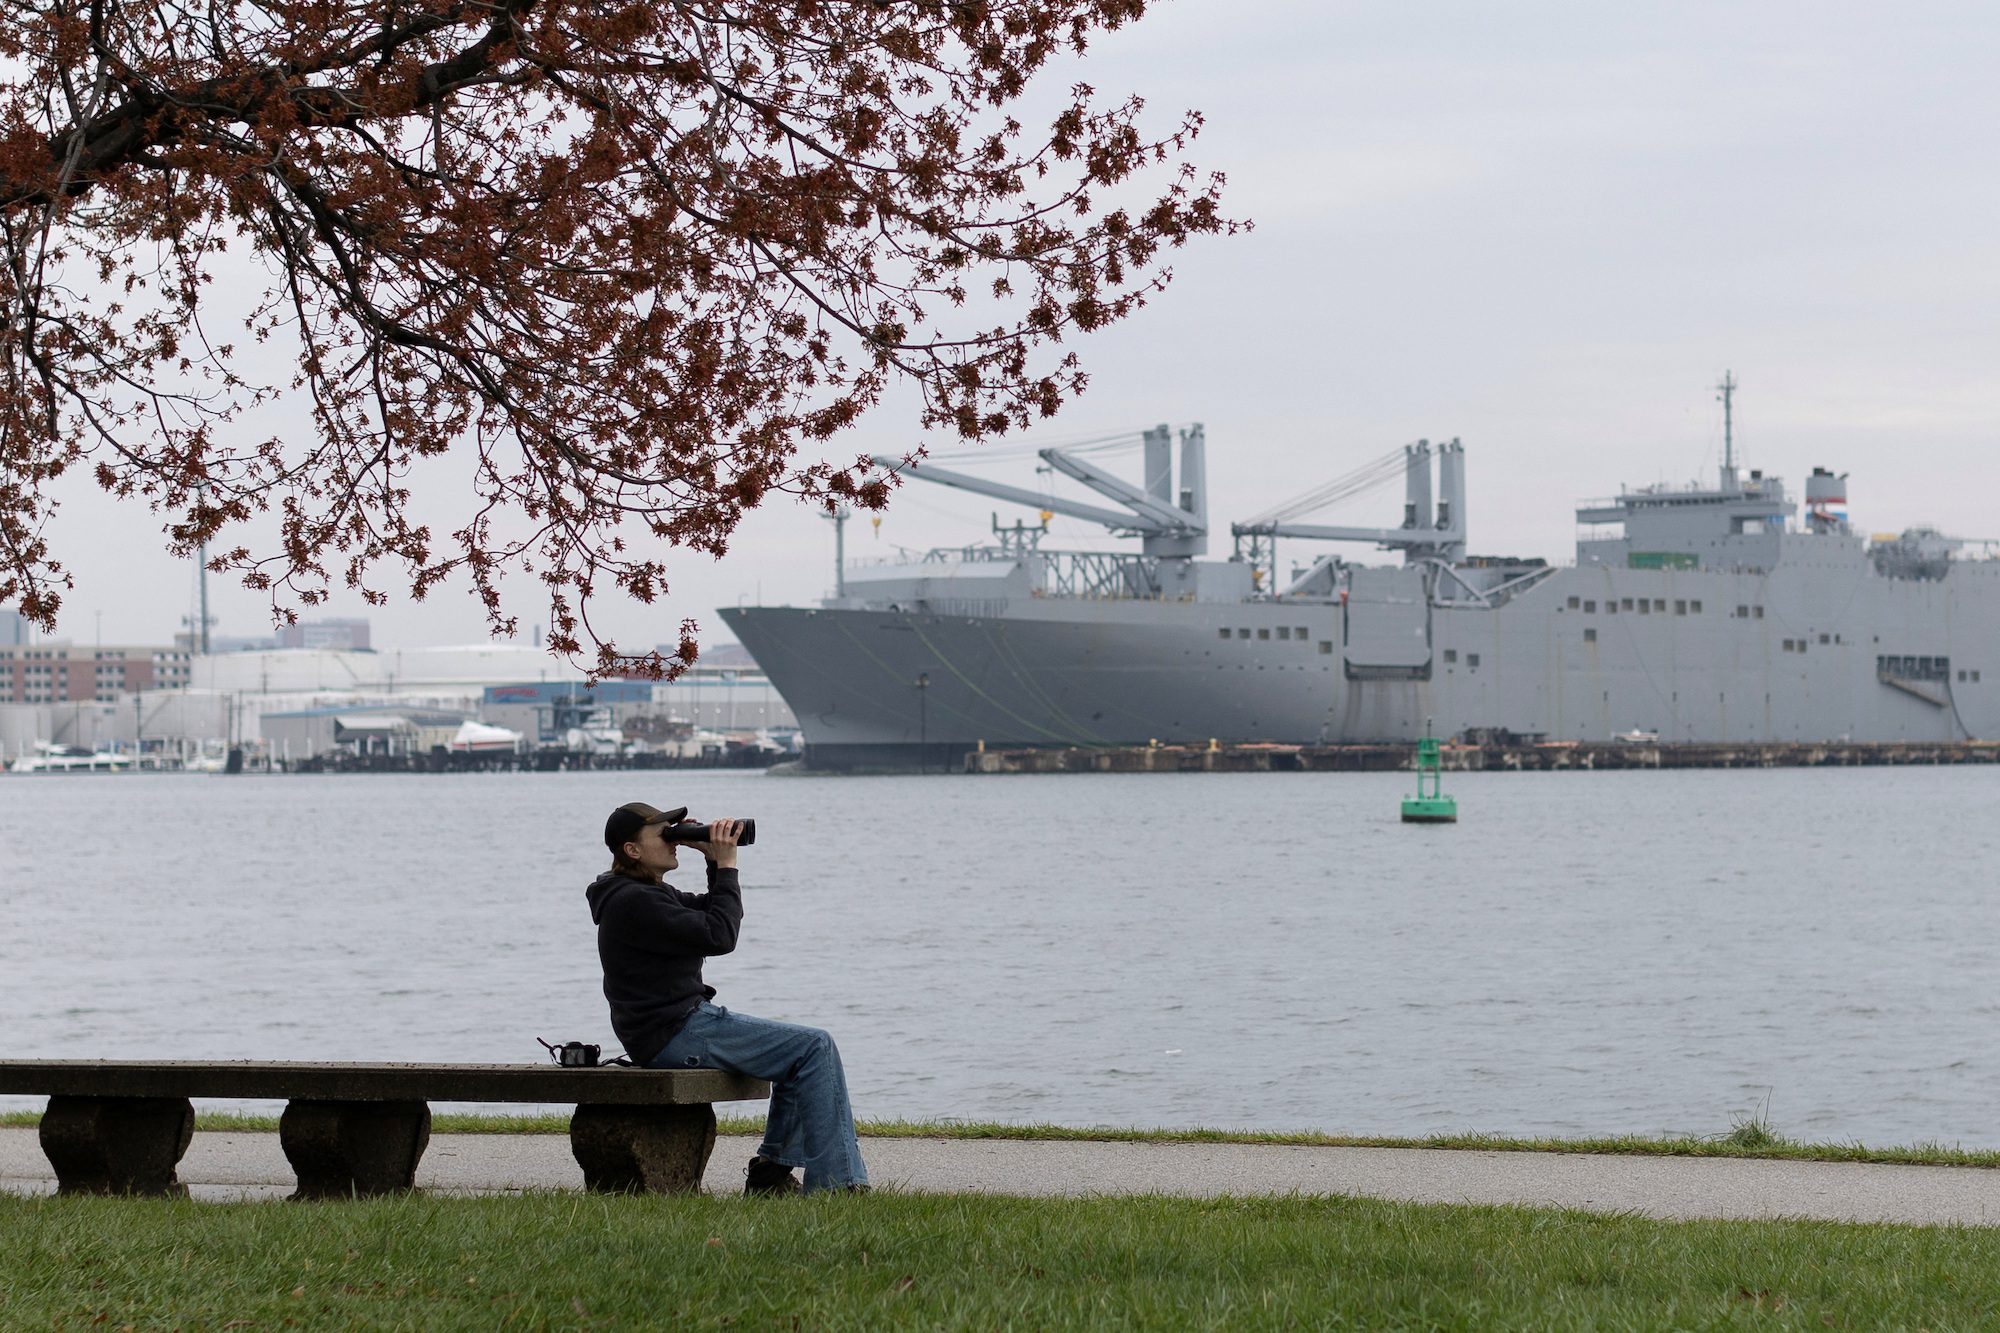 Josh Ruth uses binoculars to view the Dali cargo vessel, following the collapse of the Francis Scott Key Bridge in Baltimore, Maryland, U.S., March 28, 2024. In the background is what appears to be one of the two Algol-class fast sealift vessels. REUTERS/Tom Brenner